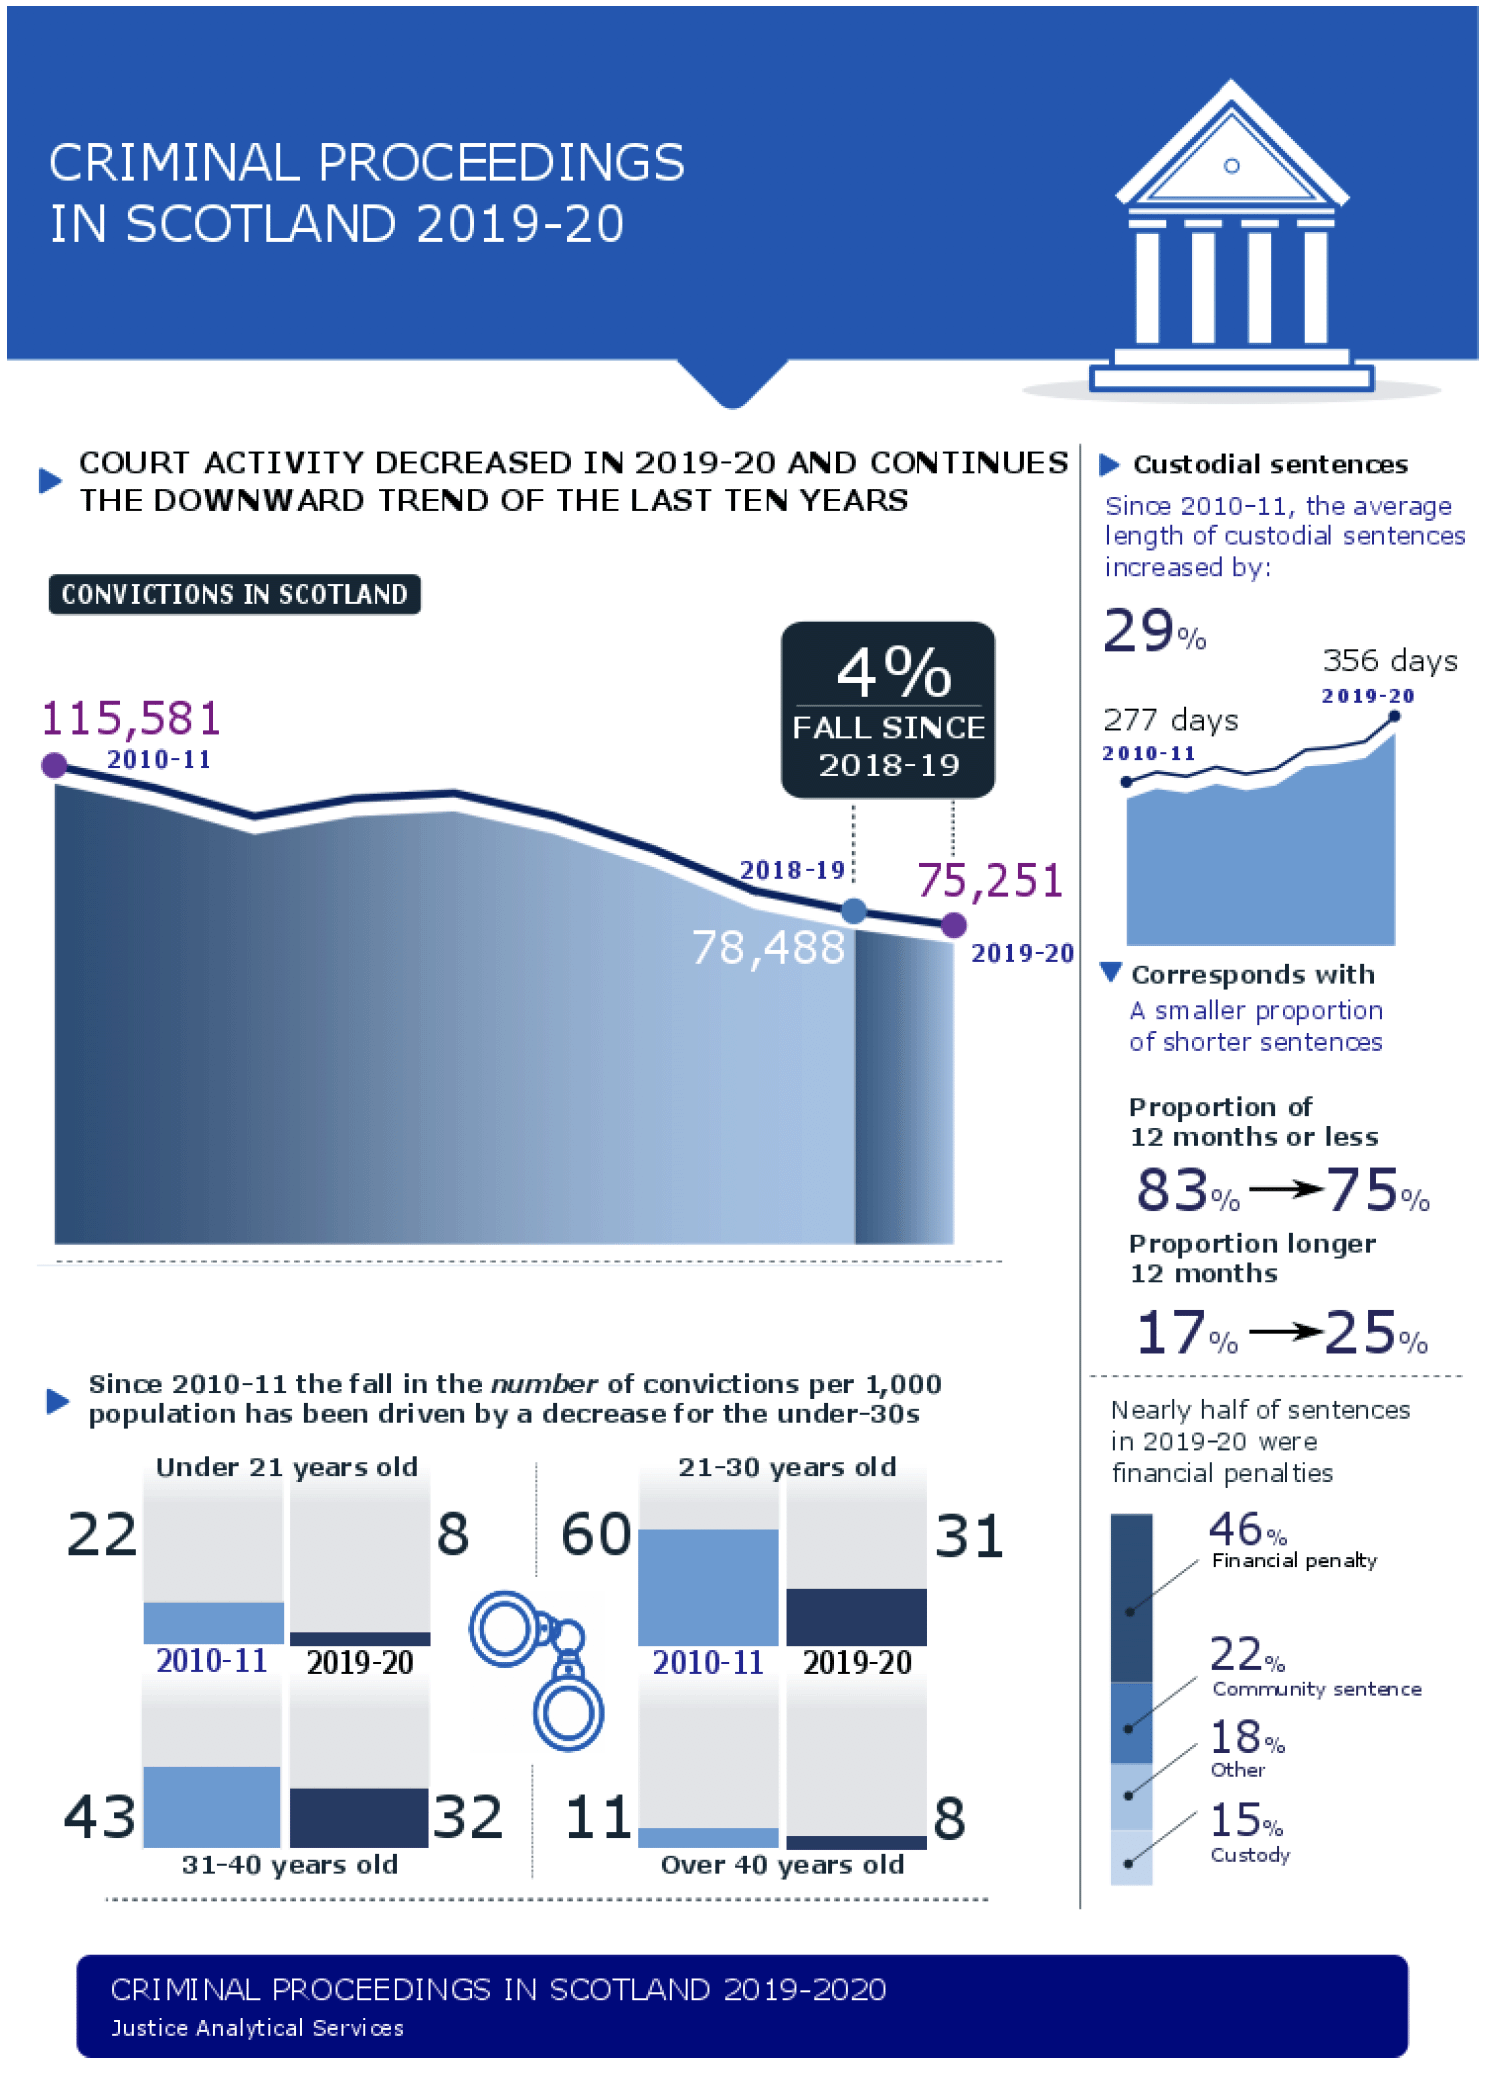 Infographic of criminal proceedings in Scotland trends 2019-20.